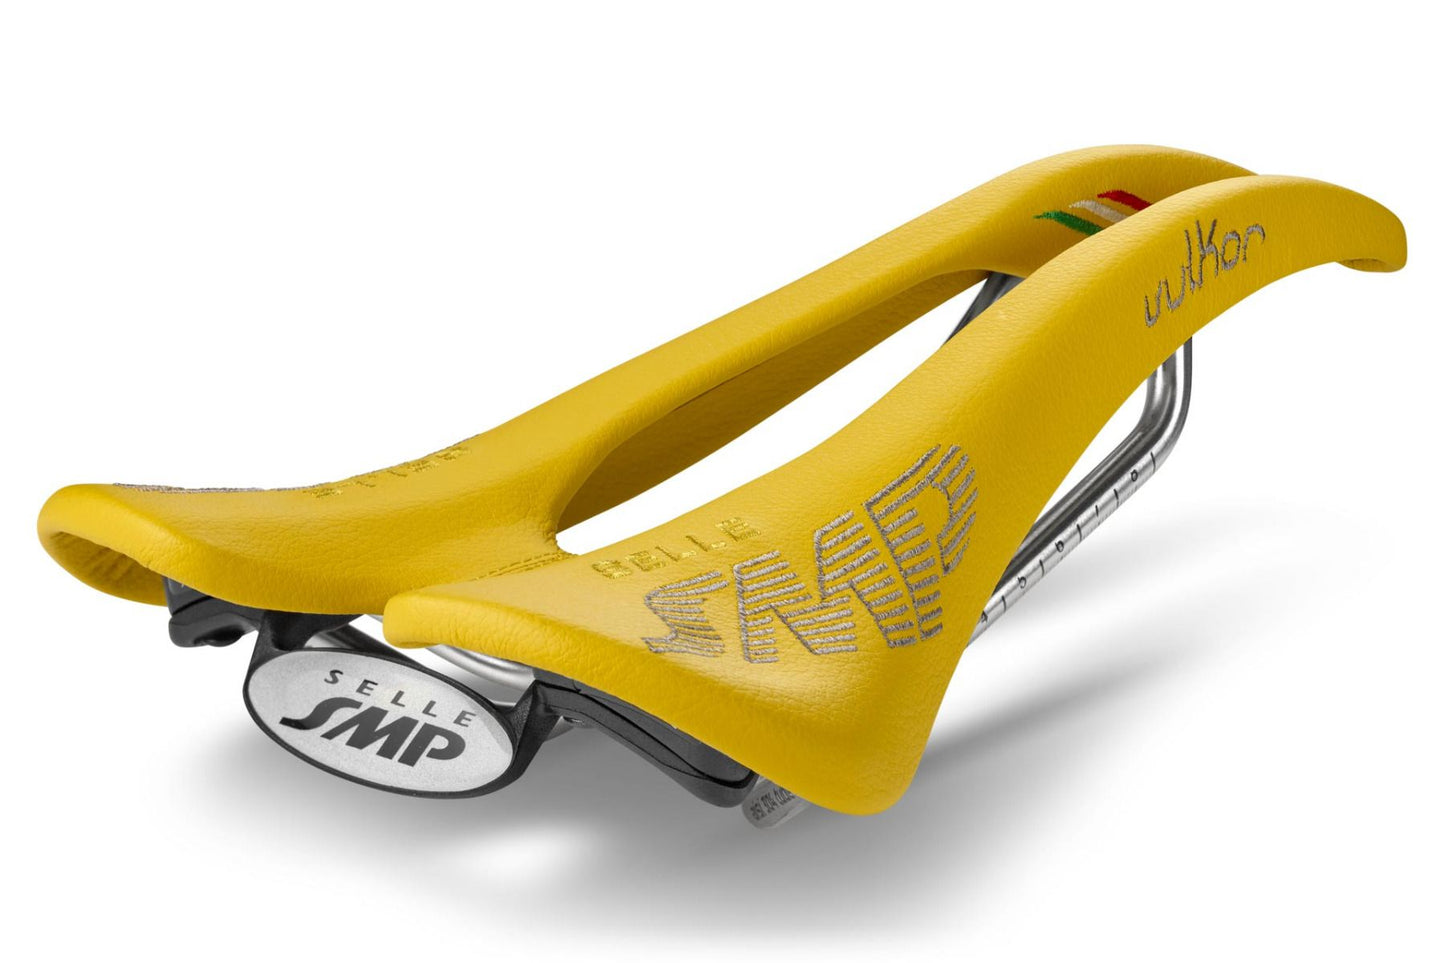 Selle SMP Vulkor Saddle with Steel Rails (Yellow)